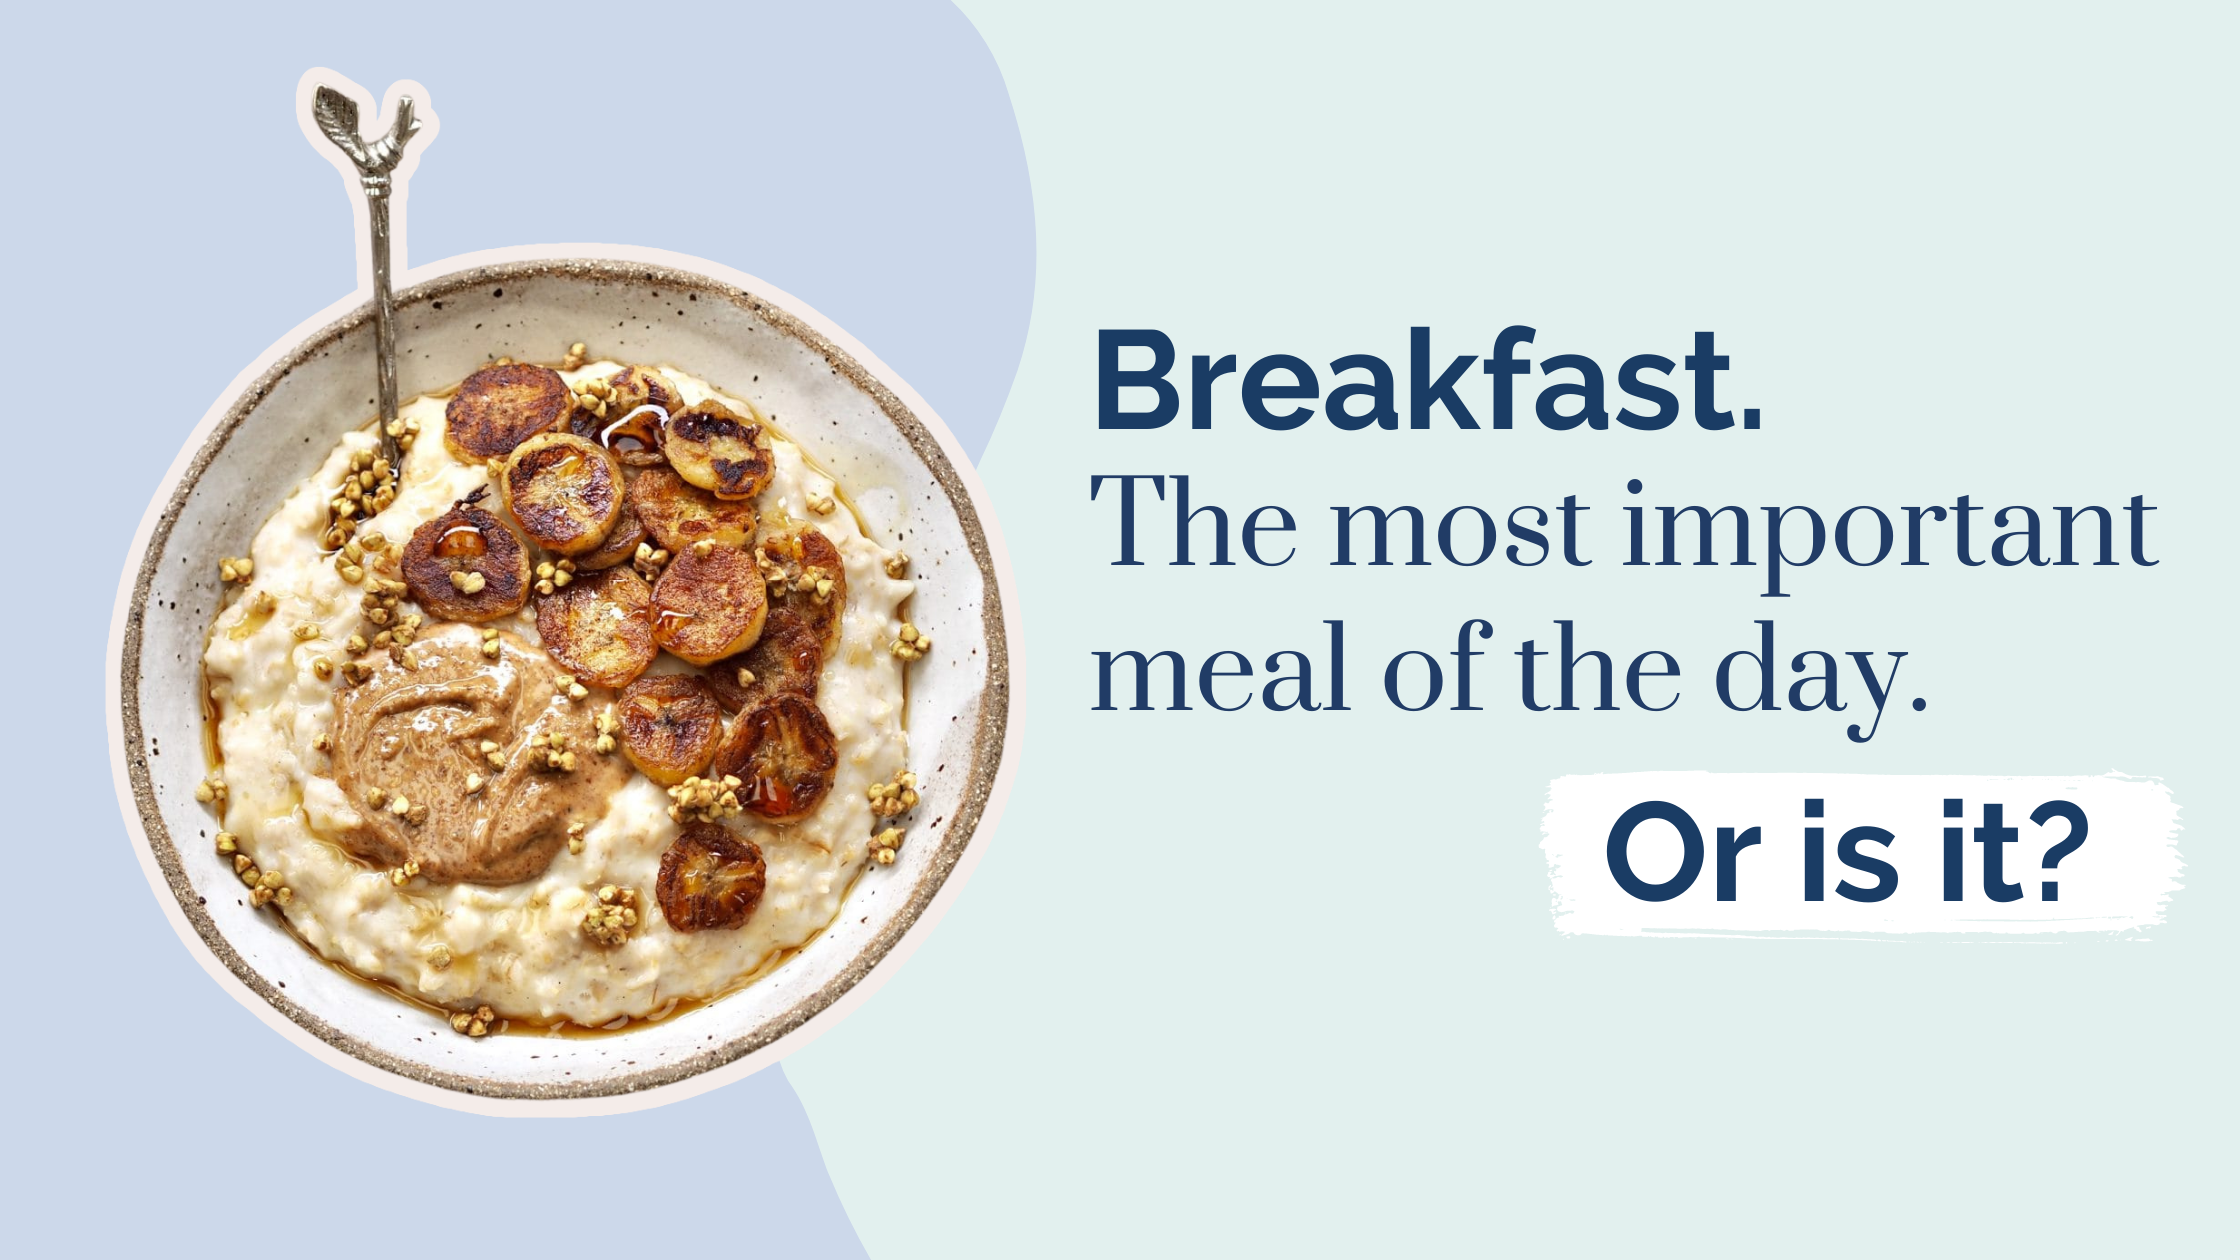 Do you really need breakfast to be healthy?